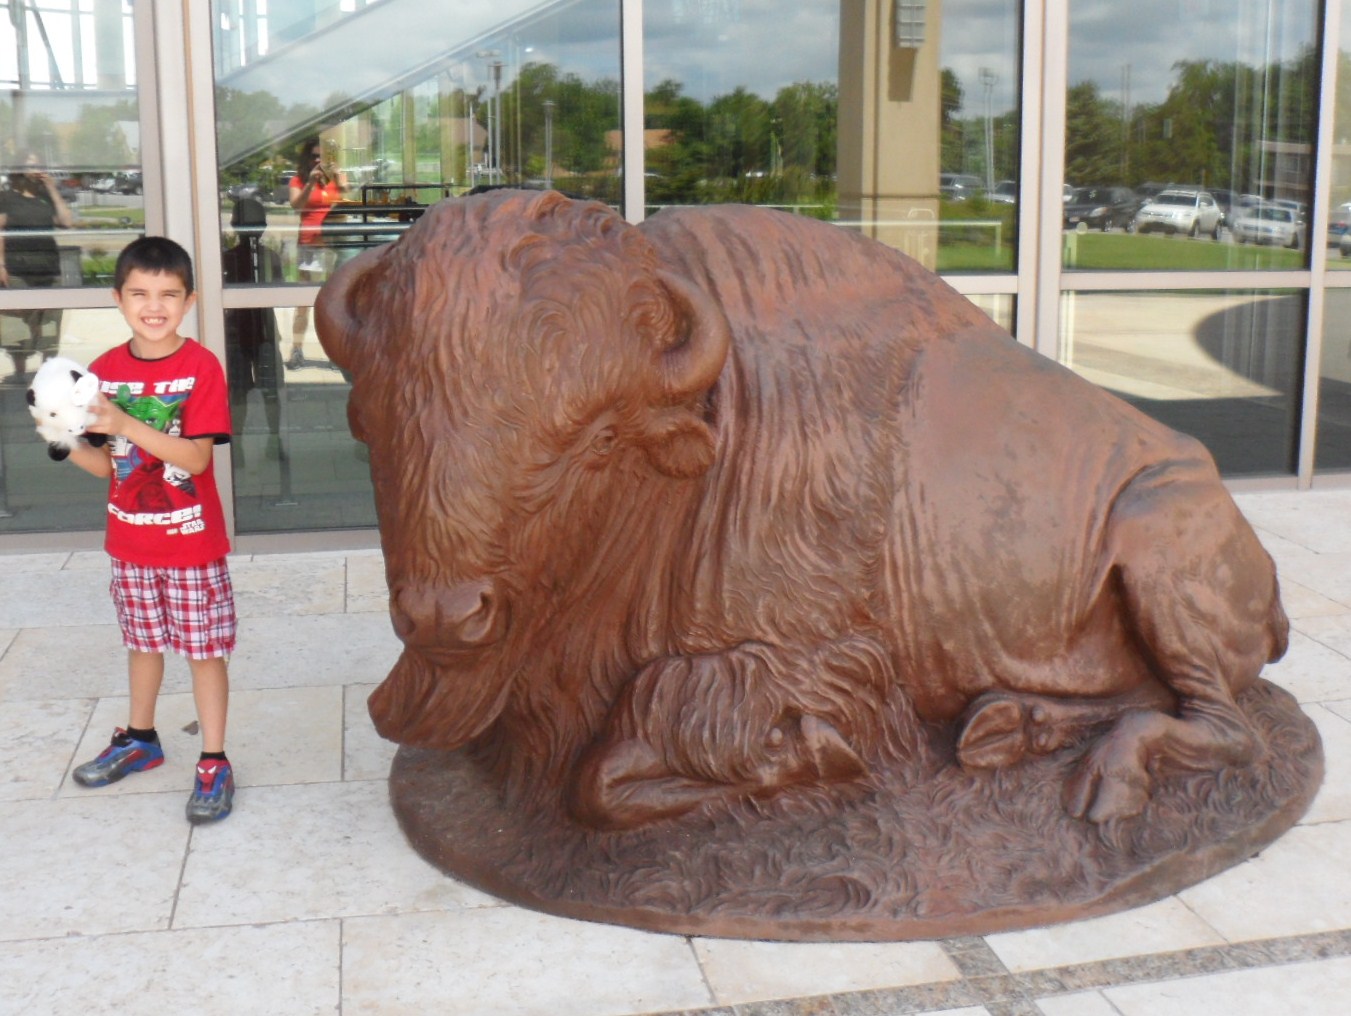 Connor wanted to take a picture by himself with his bison that he had just bought from the gift shop.